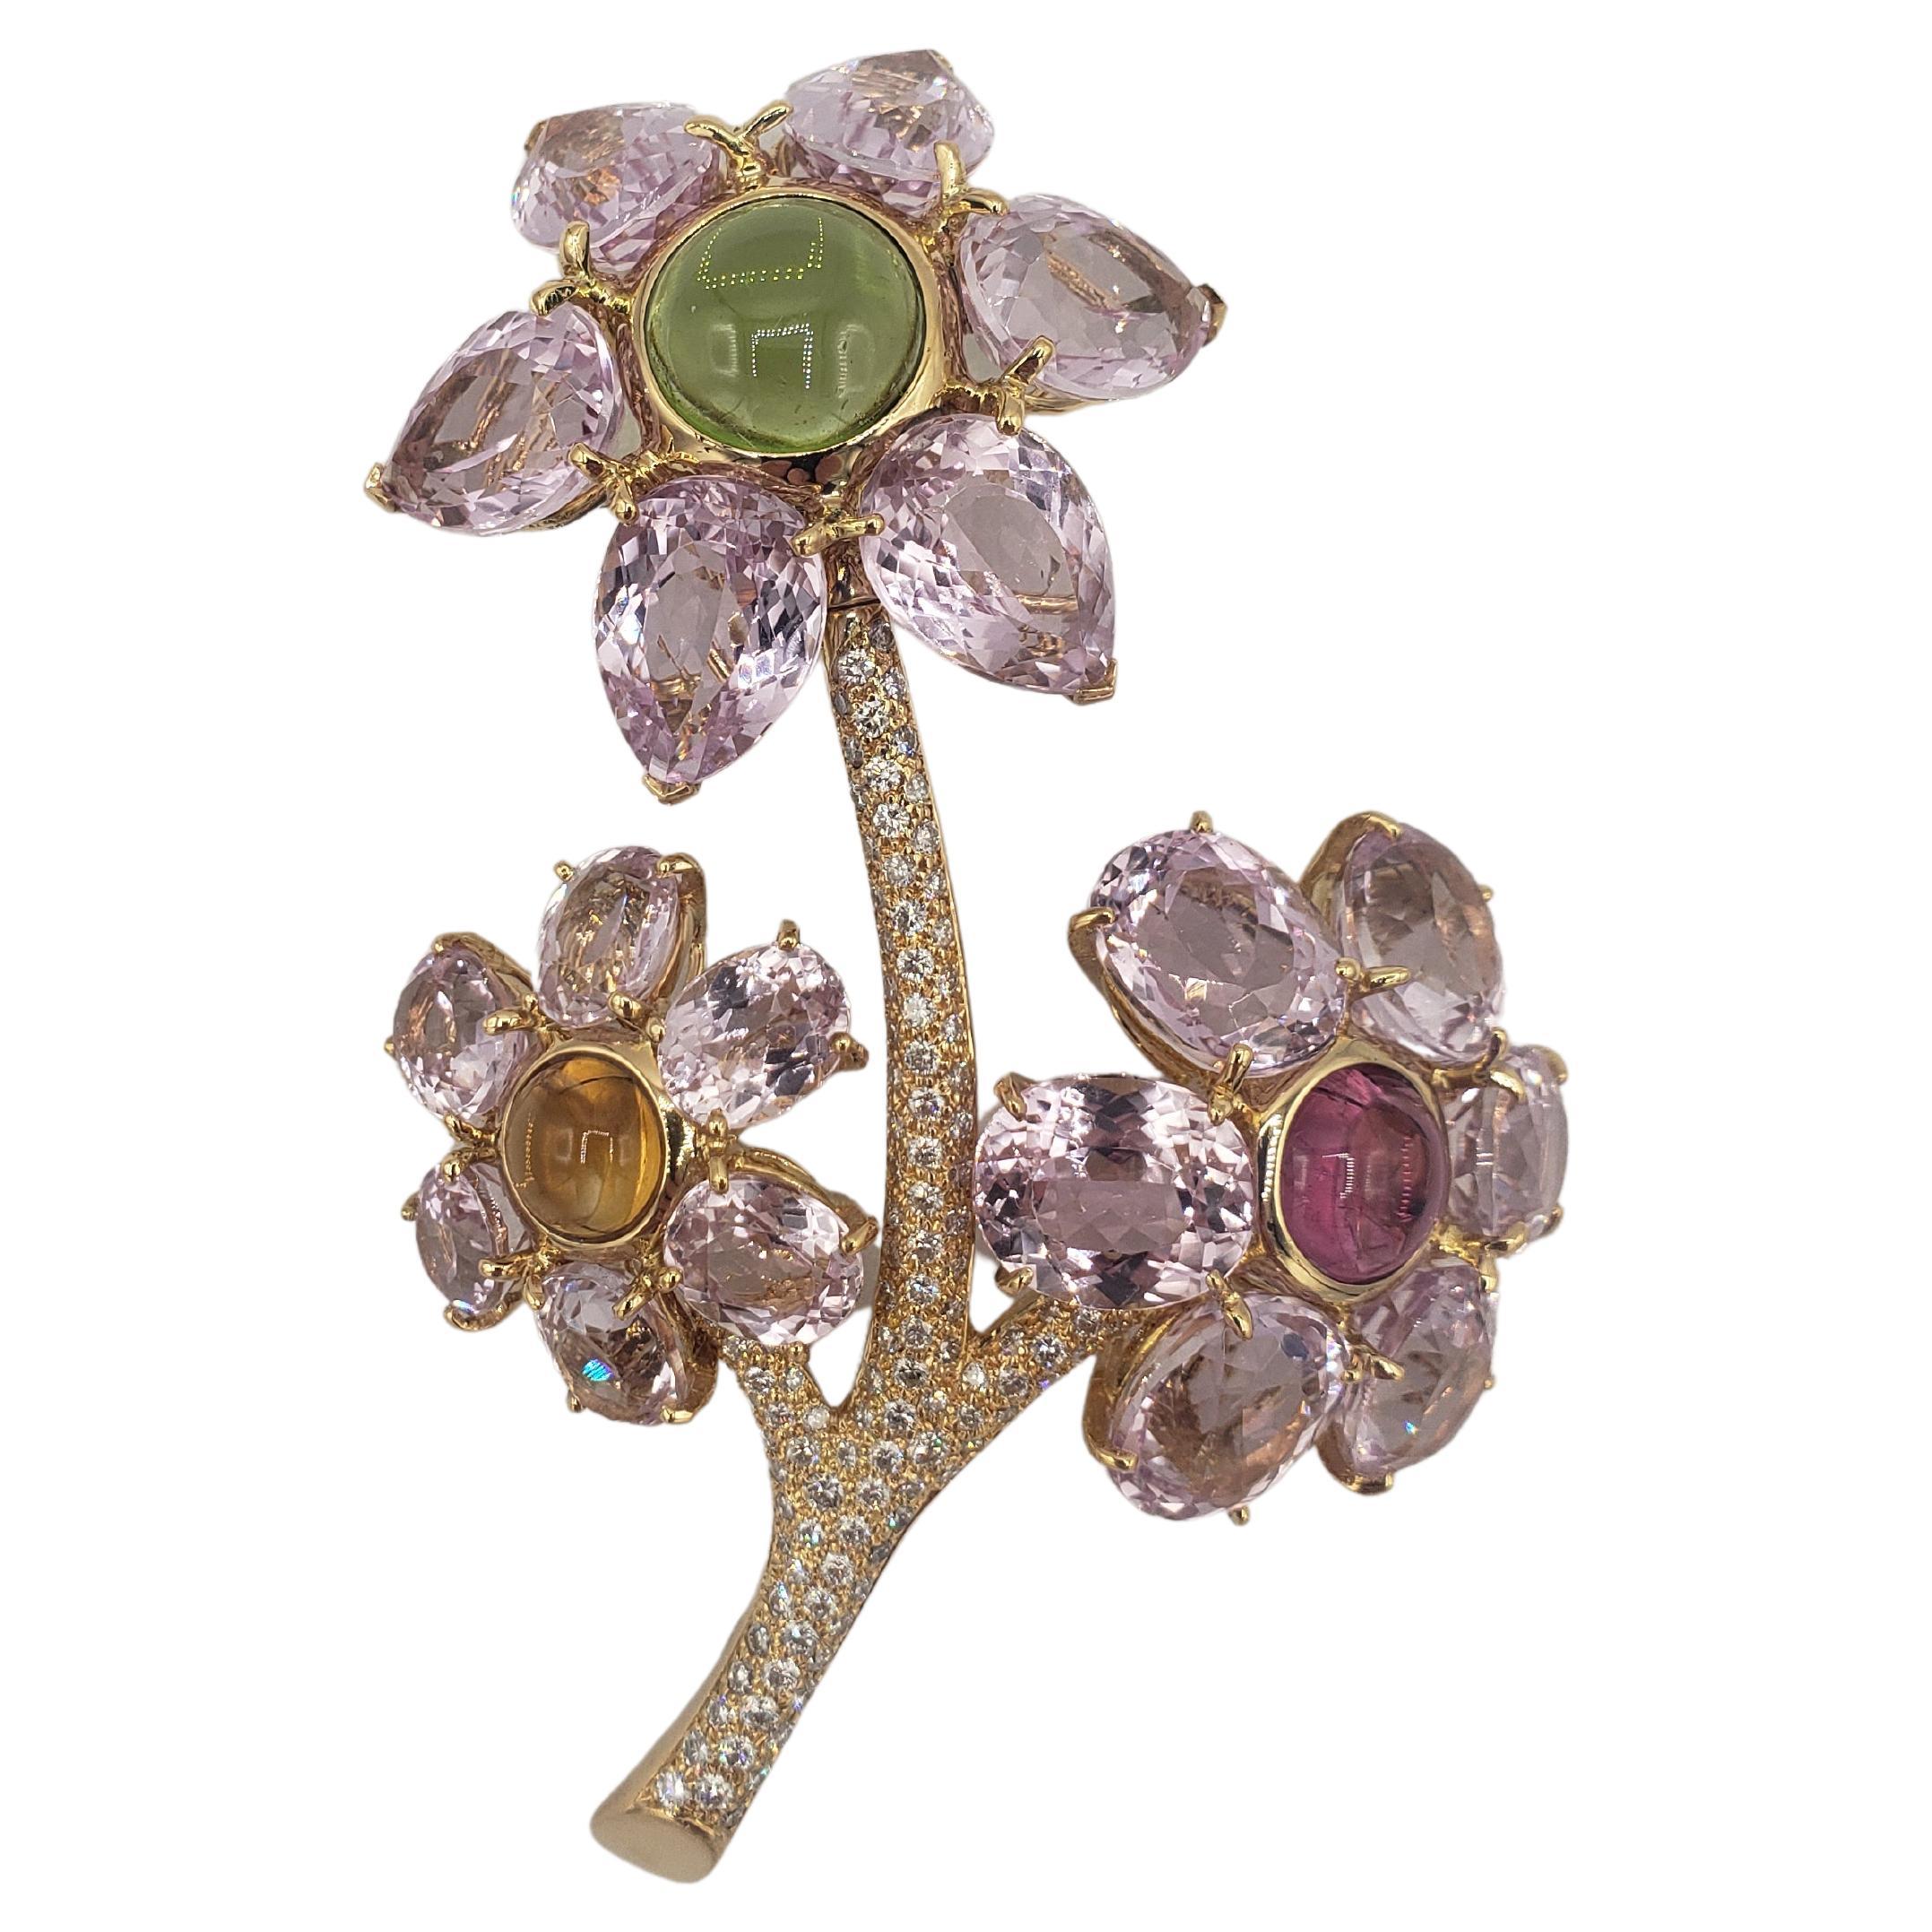 Add a touch of elegance to any outfit with this stunning 18K solid yellow gold flower brooch from LaFrancee. The exquisite pear-shaped kunzite and 21 tourmaline gemstones are set in a pavé style, creating a beautiful multicolor floral design. The